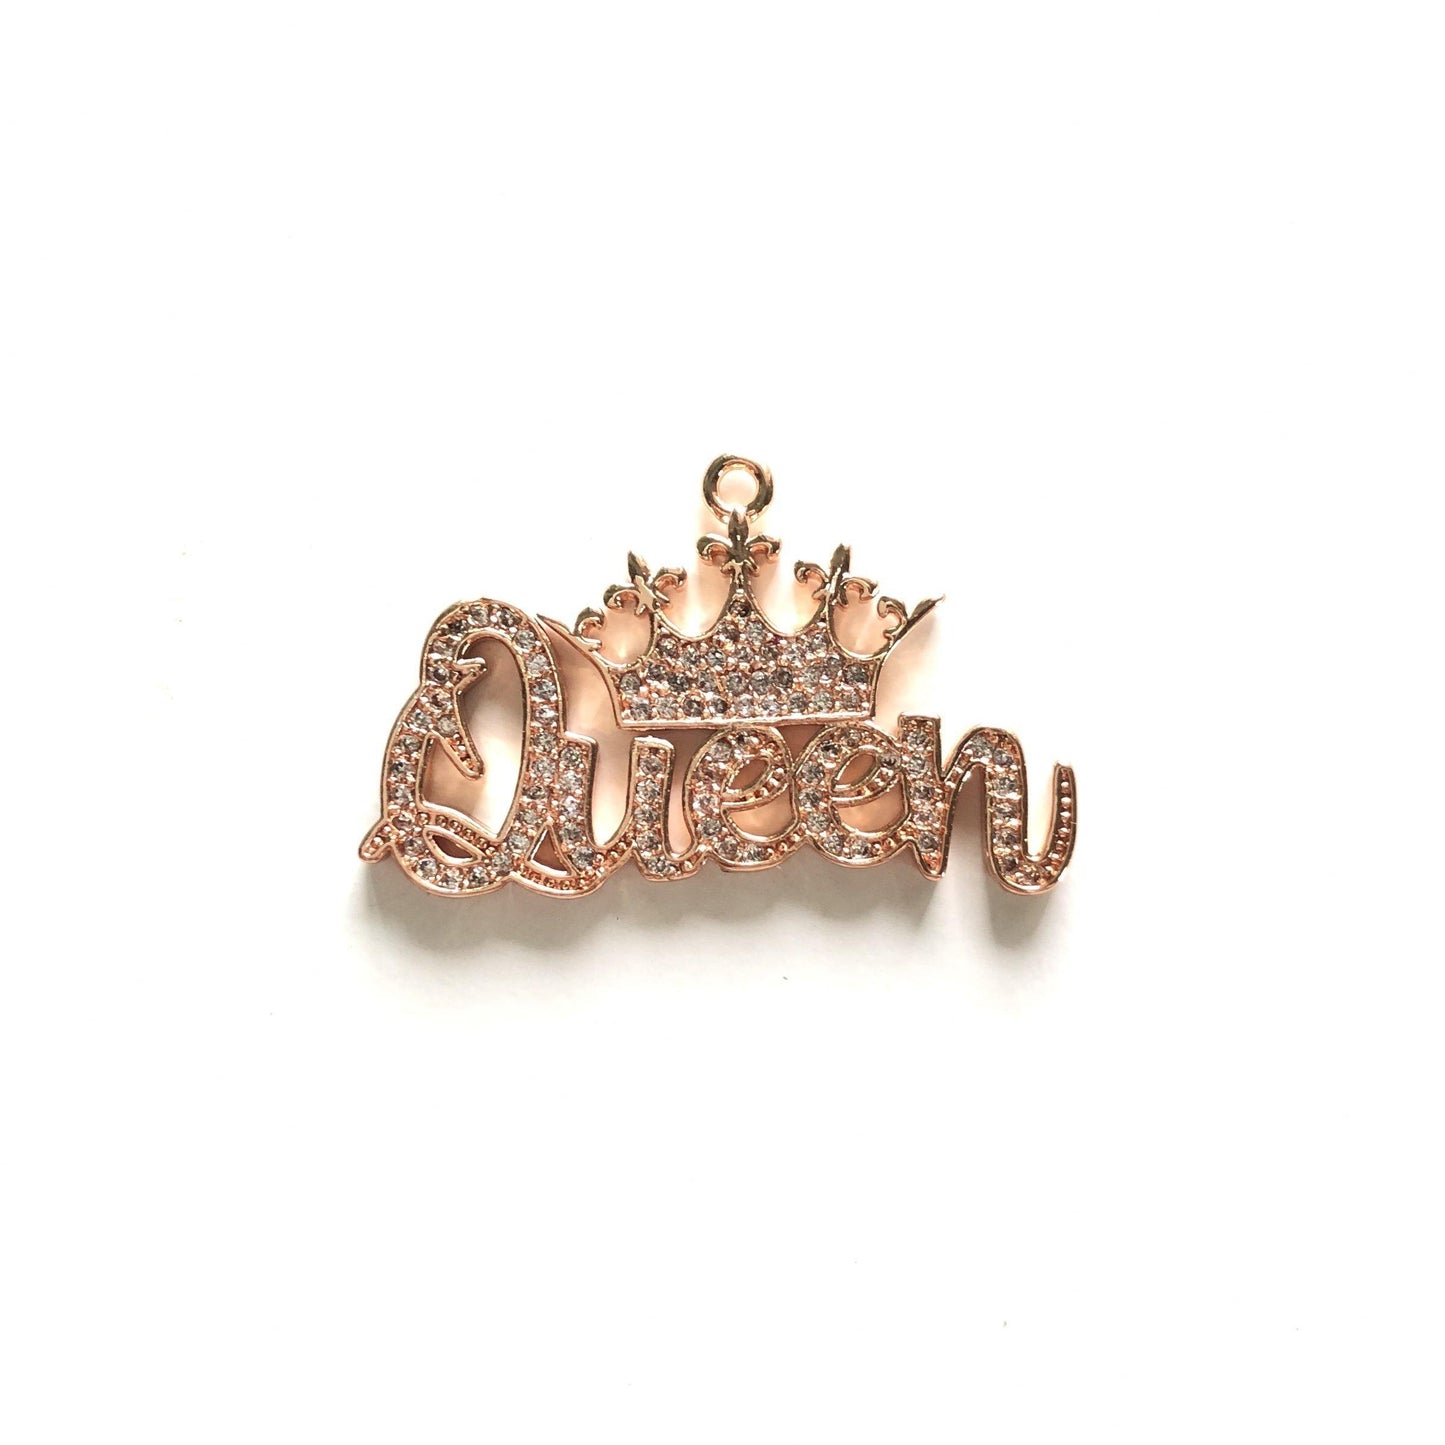 10pcs/lot 33.5*21mm CZ Paved Crown Queen Charms Rose Gold CZ Paved Charms Crowns Queen Charms Words & Quotes Charms Beads Beyond